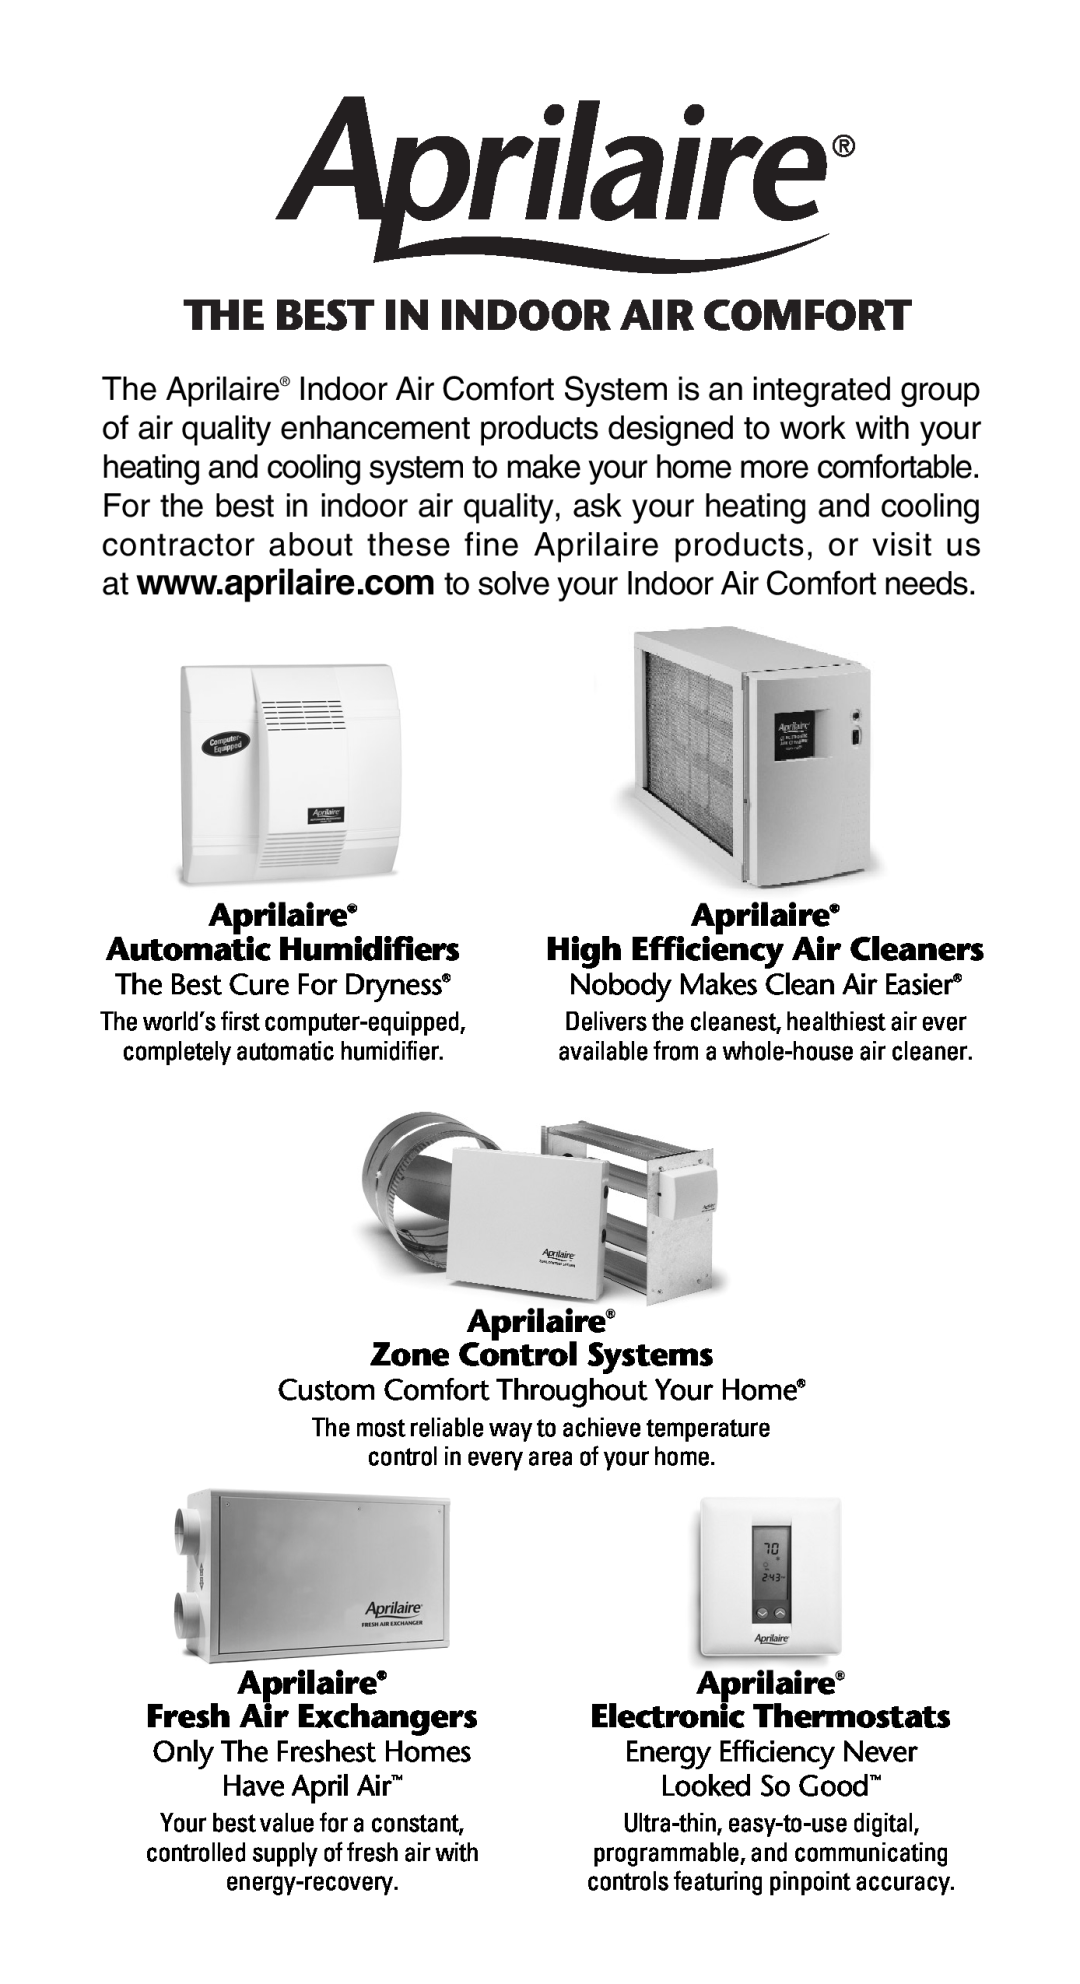 Aprilaire 224, 350, 360, 760 The Best In Indoor Air Comfort, Aprilaire, Automatic Humidifiers, High Efficiency Air Cleaners 